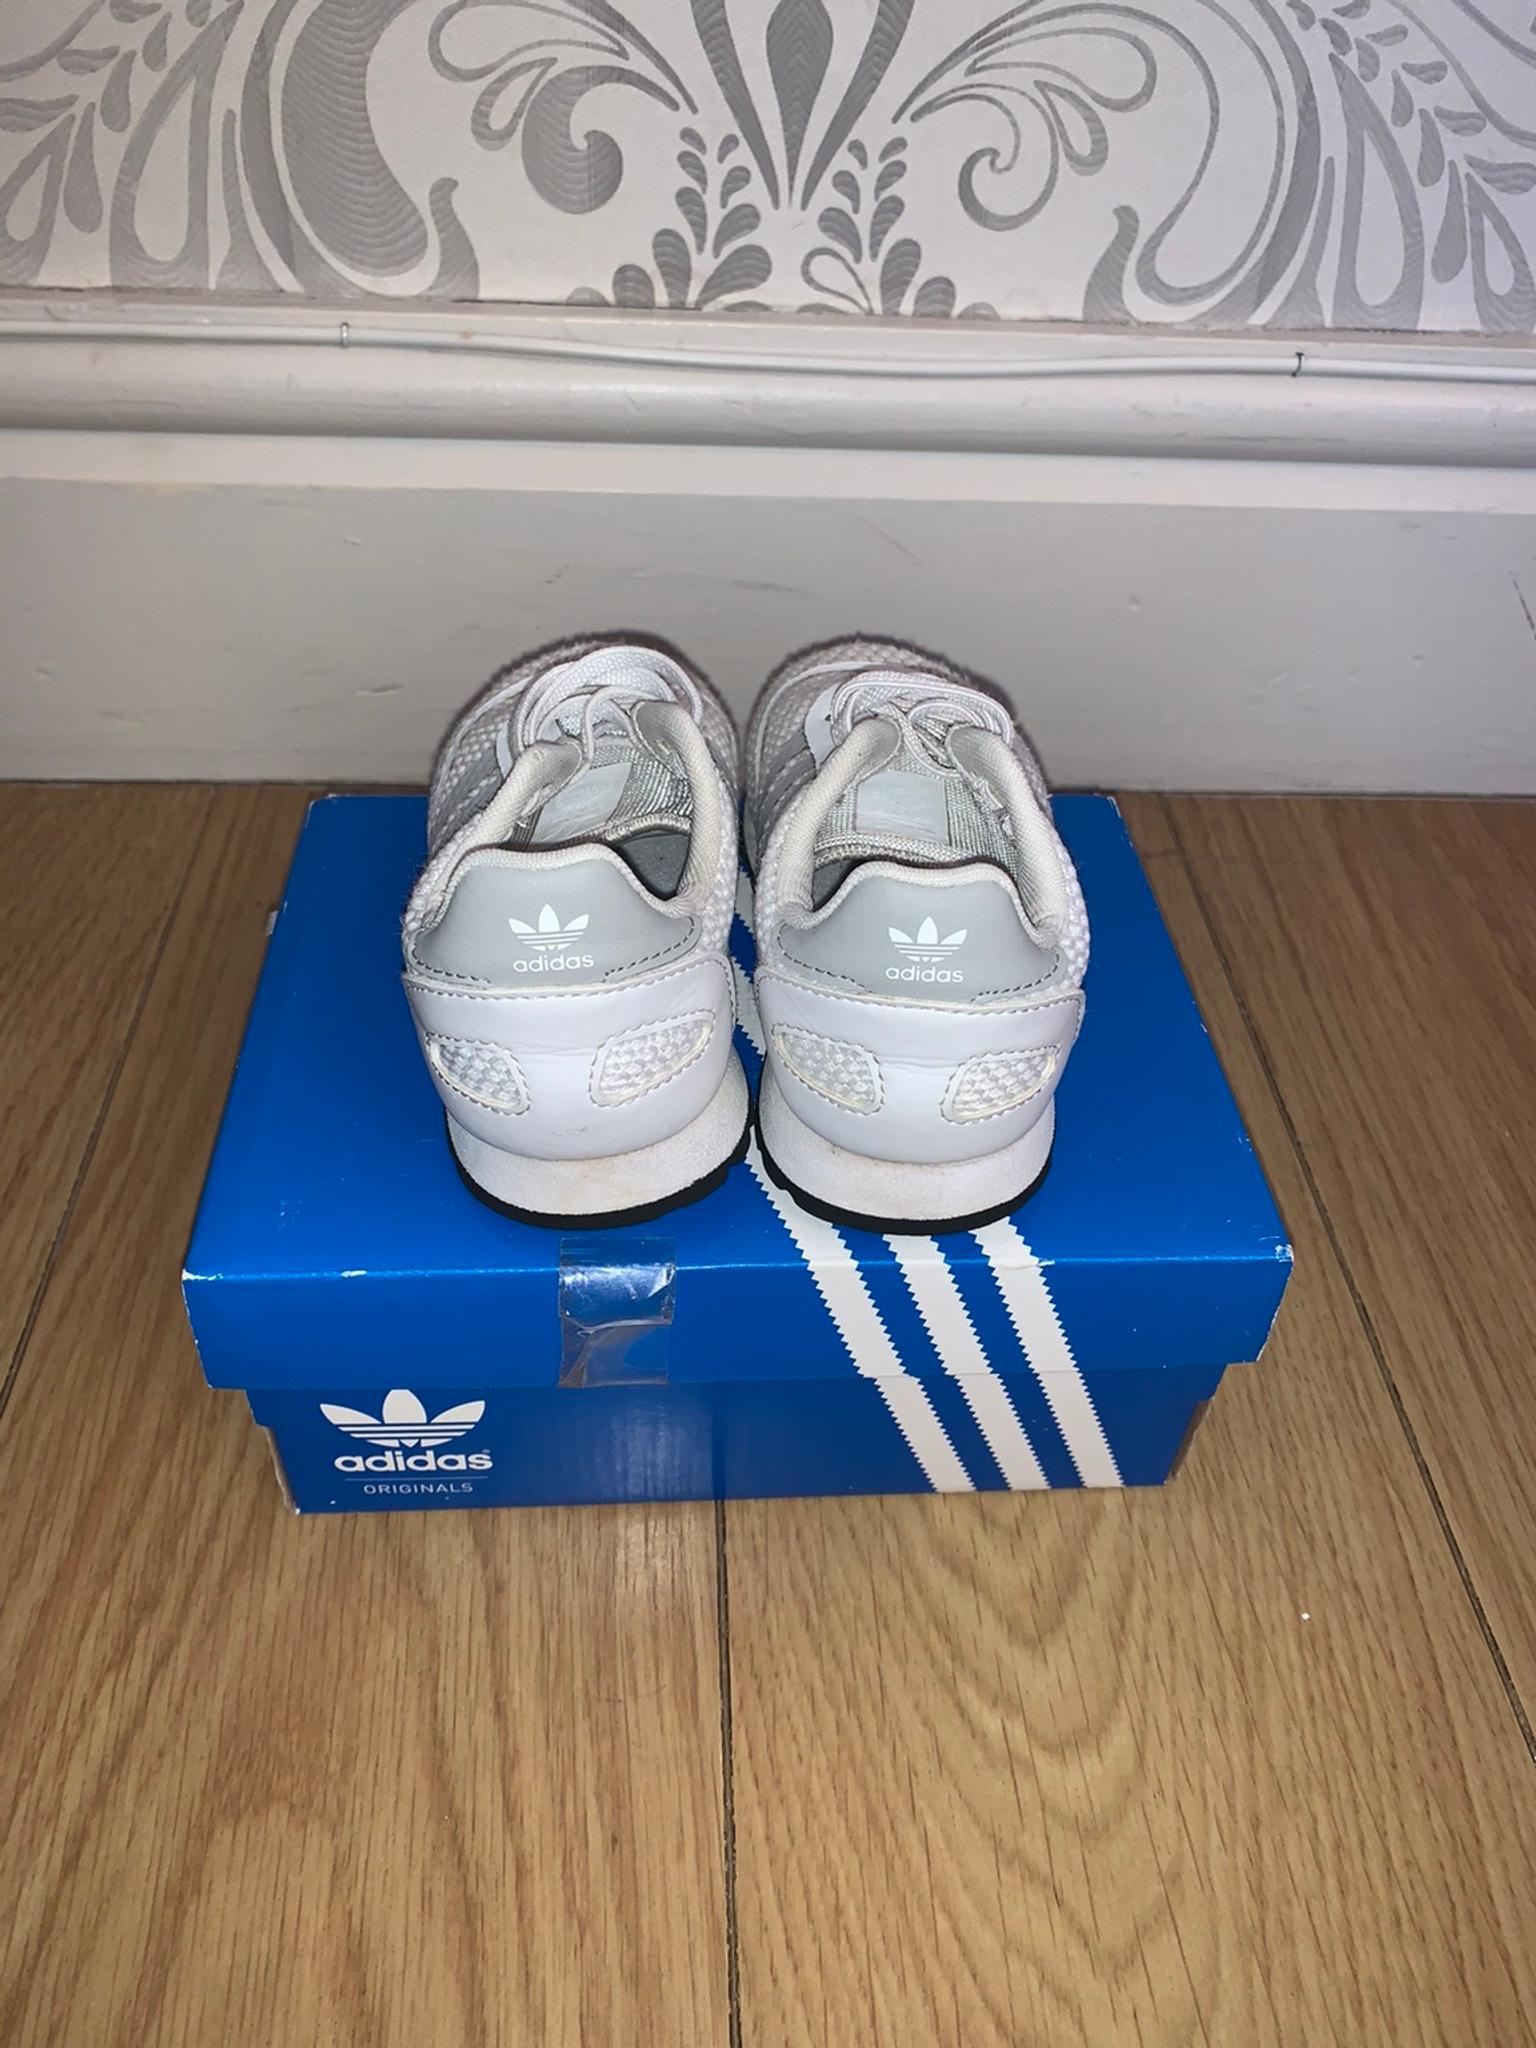 Adidas Ortholite white trainers UK 6 in L16 Liverpool for £5.00 for sale |  Shpock